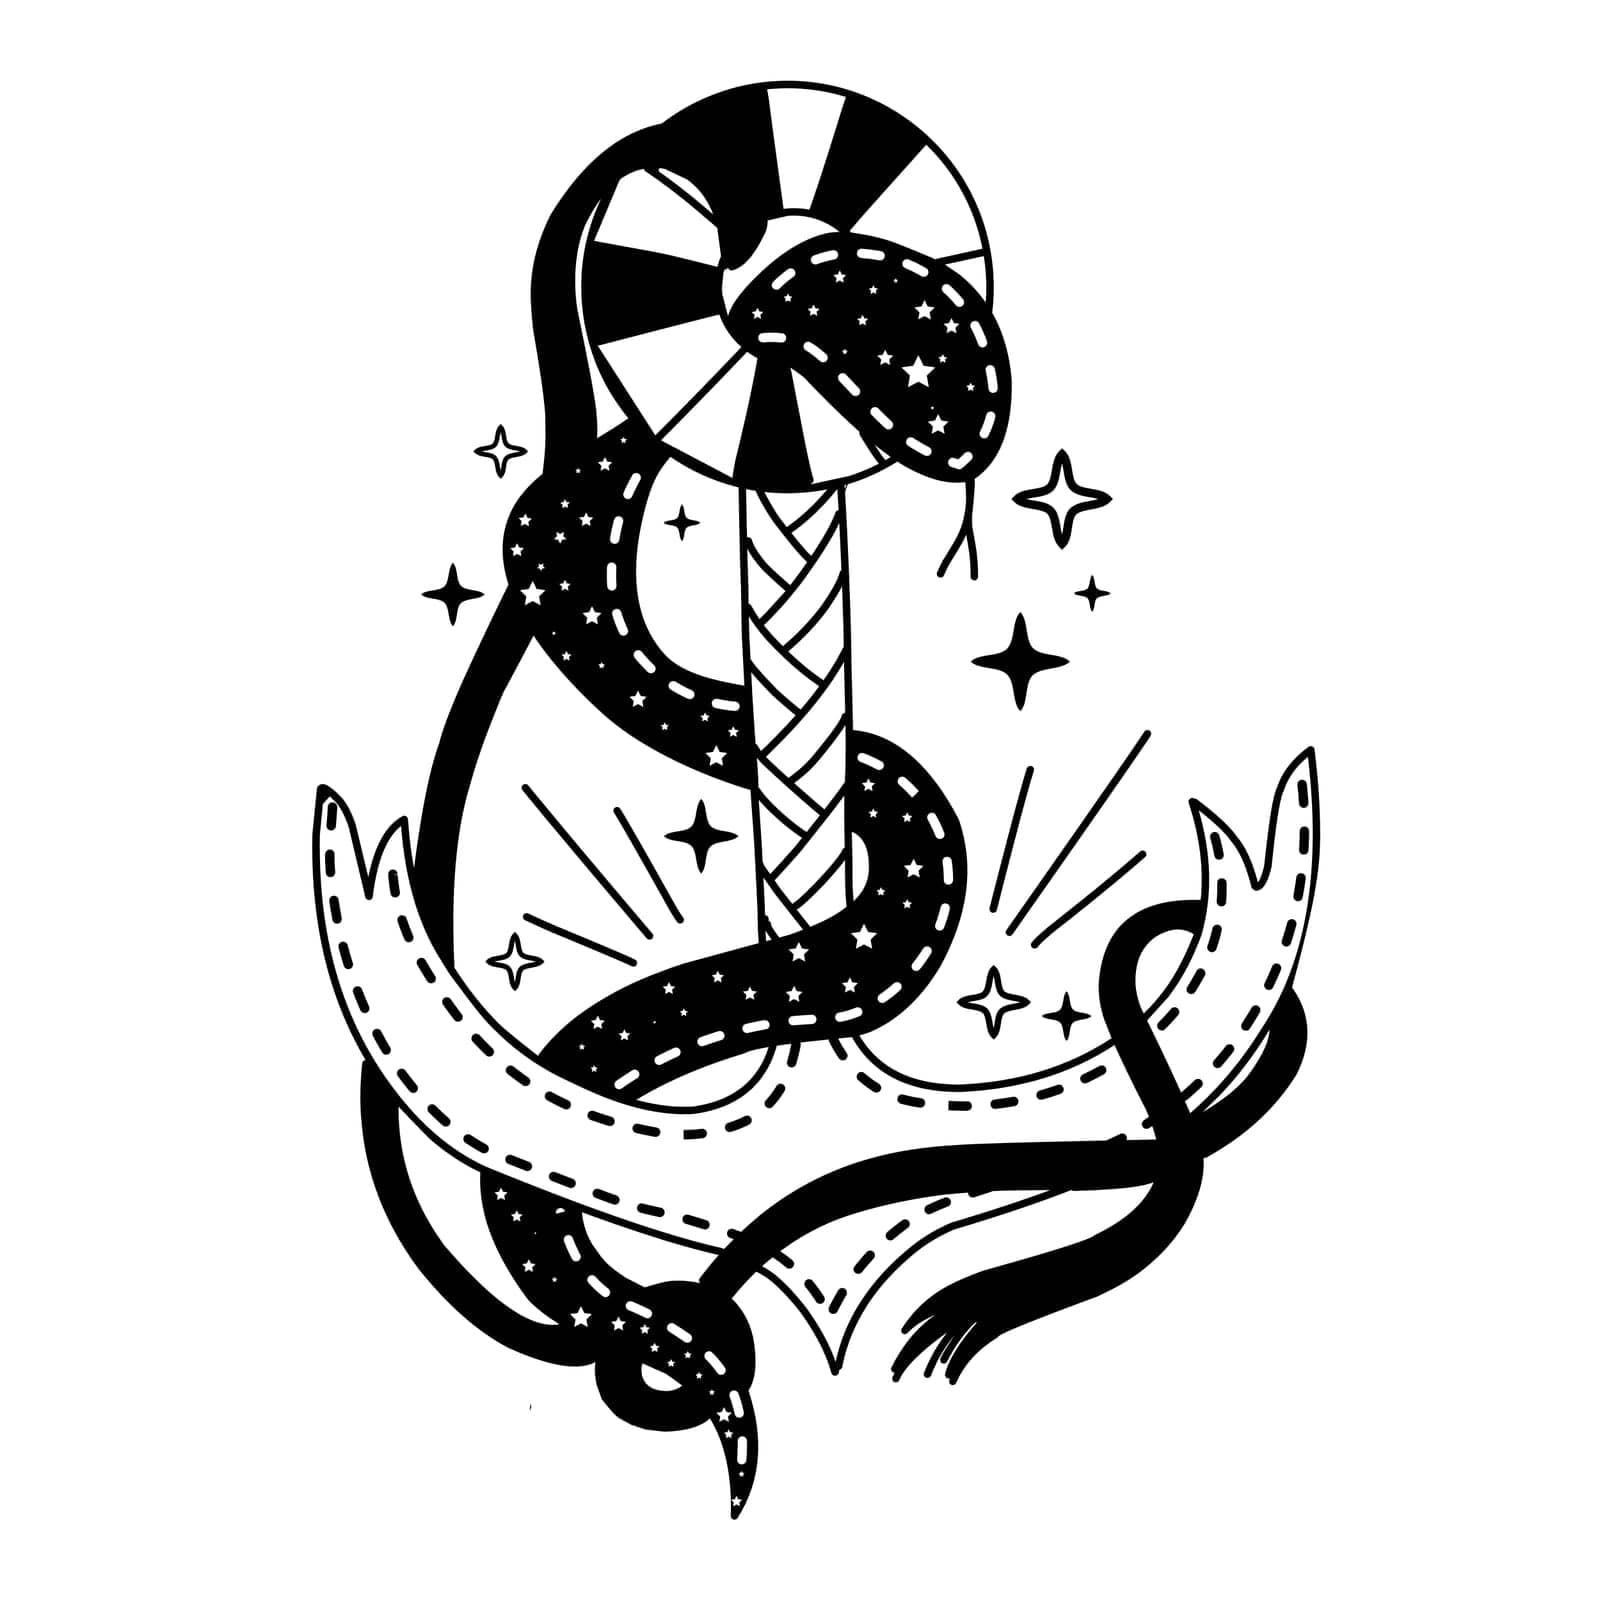 old school tattoo. Anchor. Sea snake. A snake wraps around an anchor.astrology tattoo style